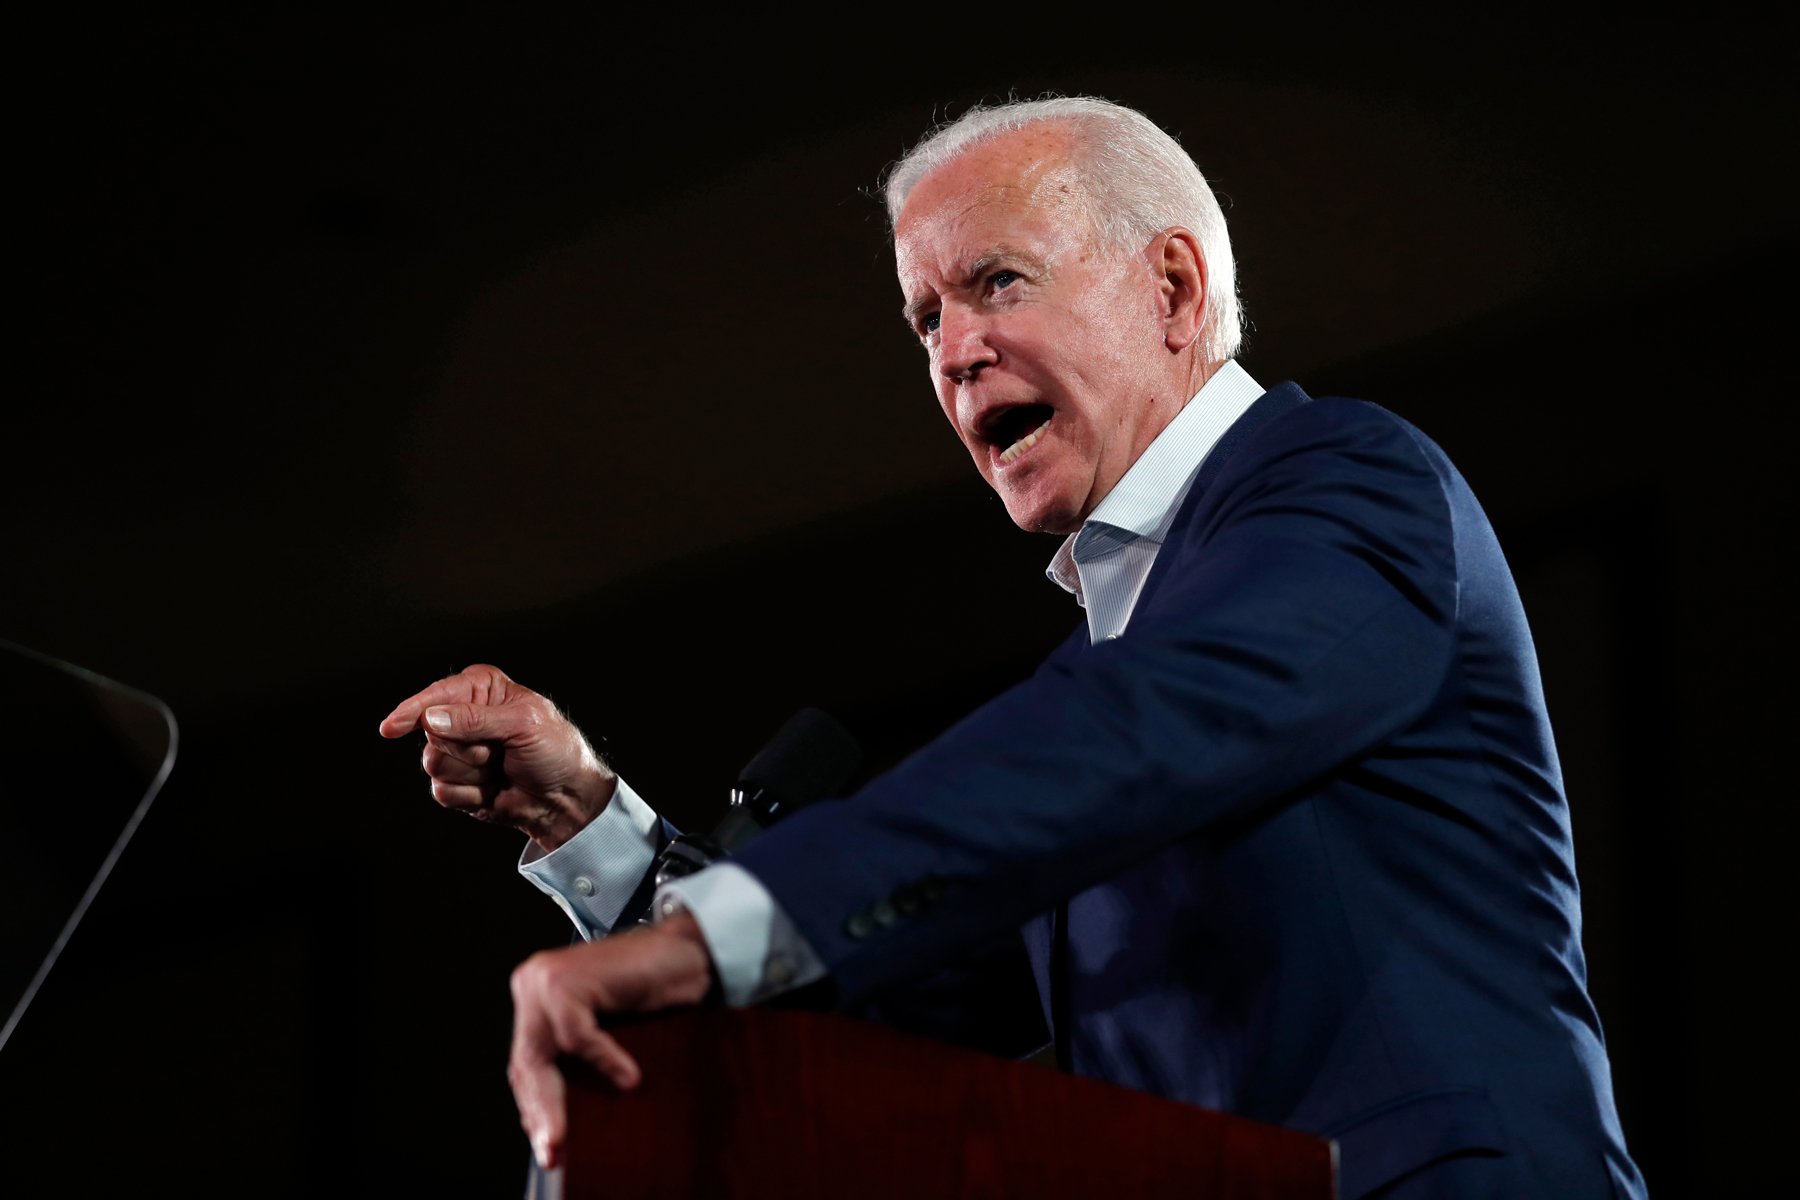 Why Weed Advocates Aren’t Happy About Joe Biden’s Candidacy